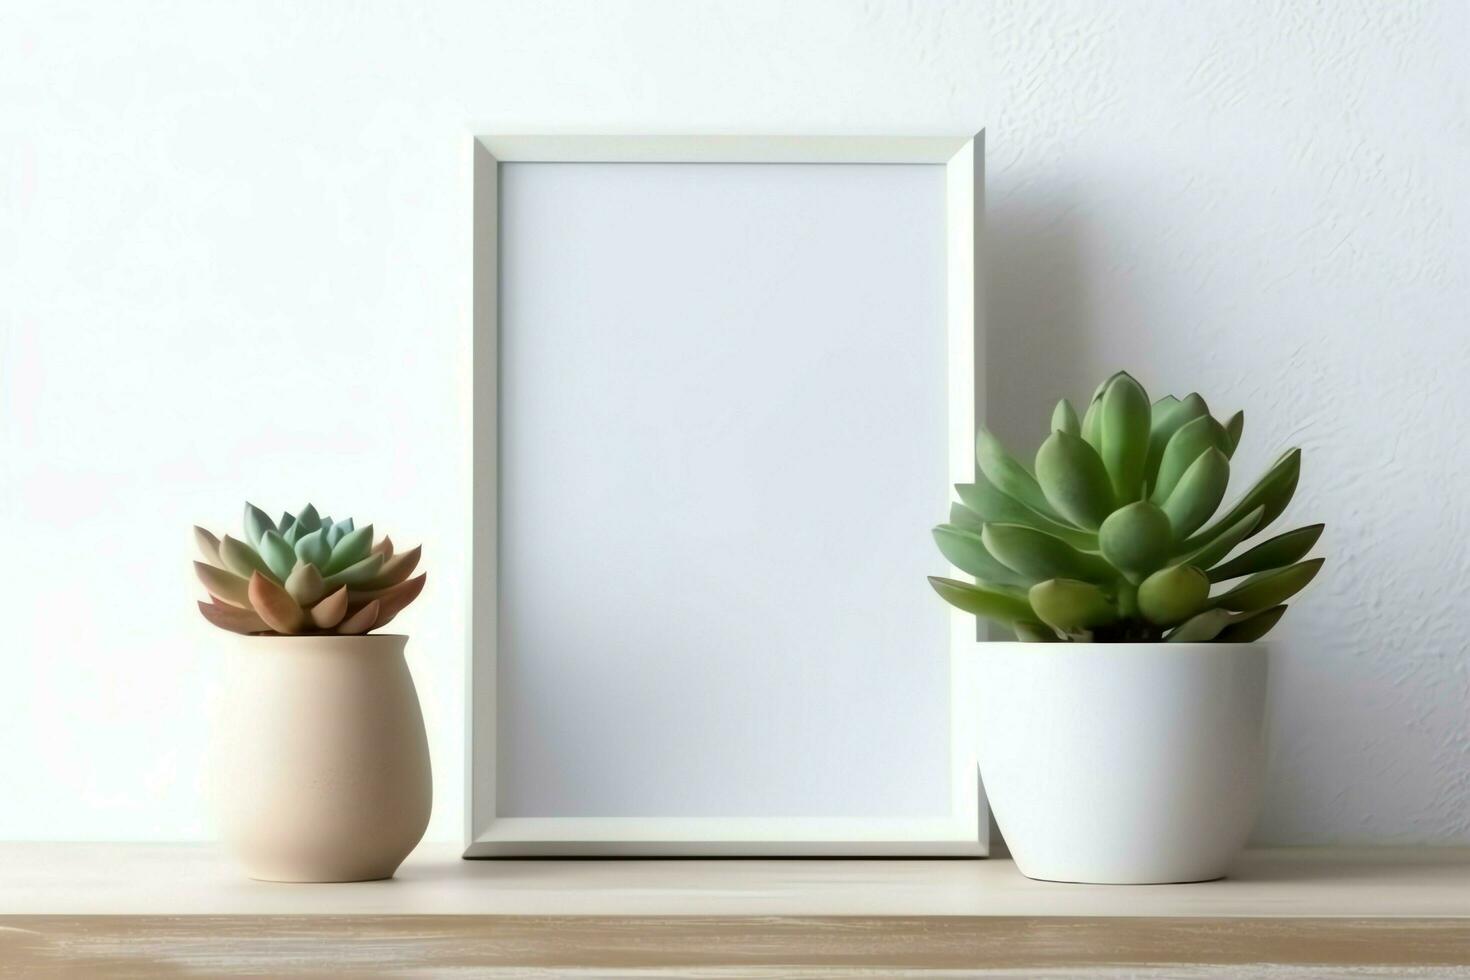 Frame mock up of blank picture standing on a shelf with succulent plant or cactus in scandinavian concept by AI Generated photo